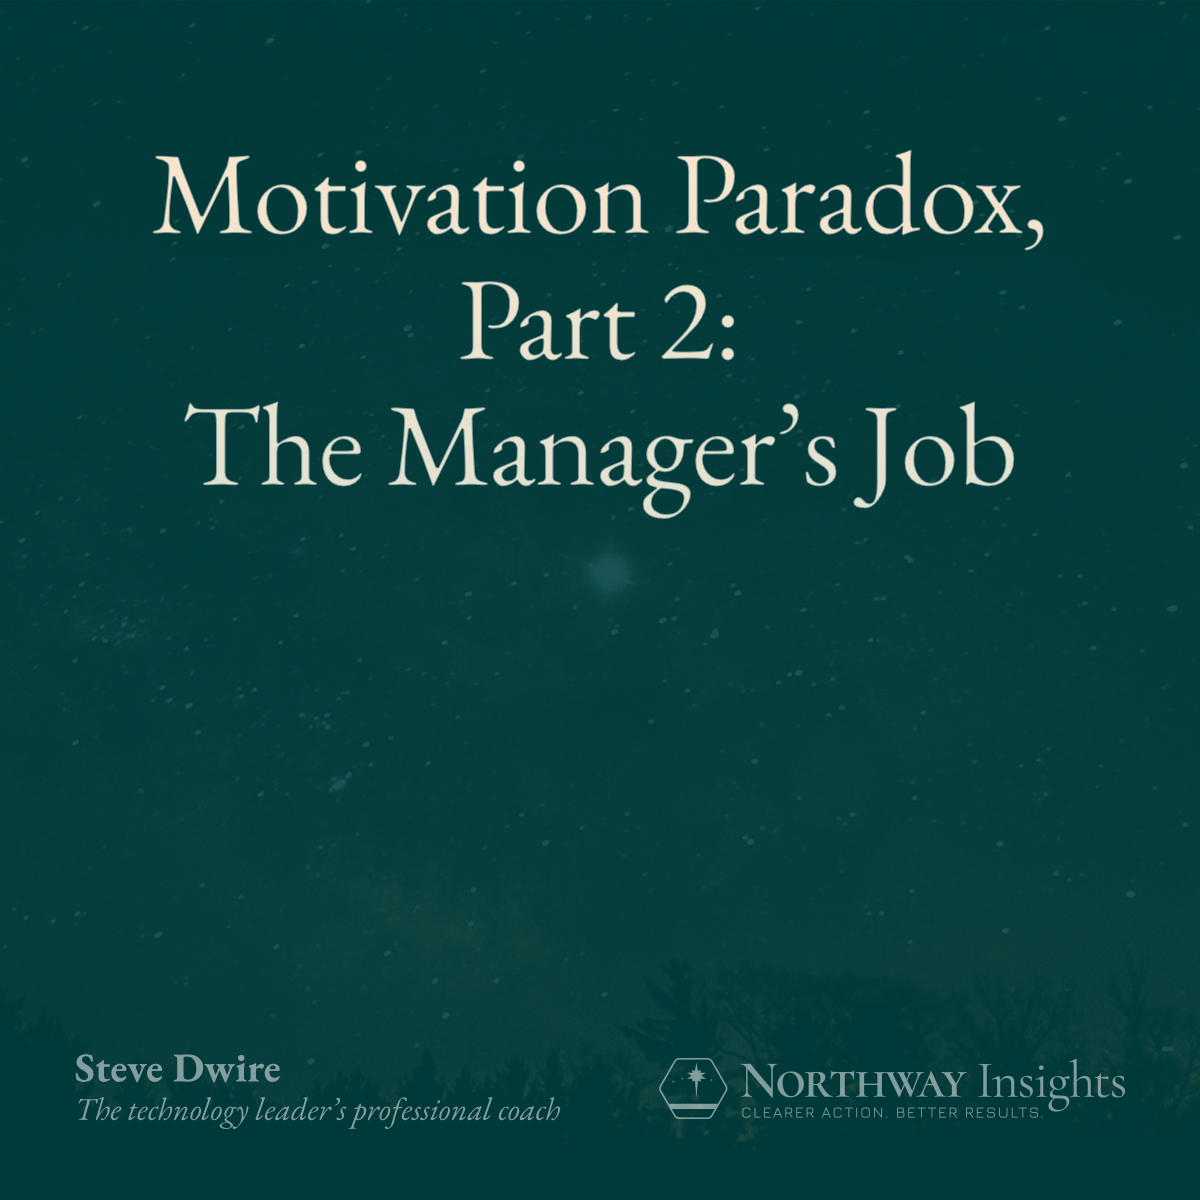 Motivation Paradox, Part 2: The Manager’s Job